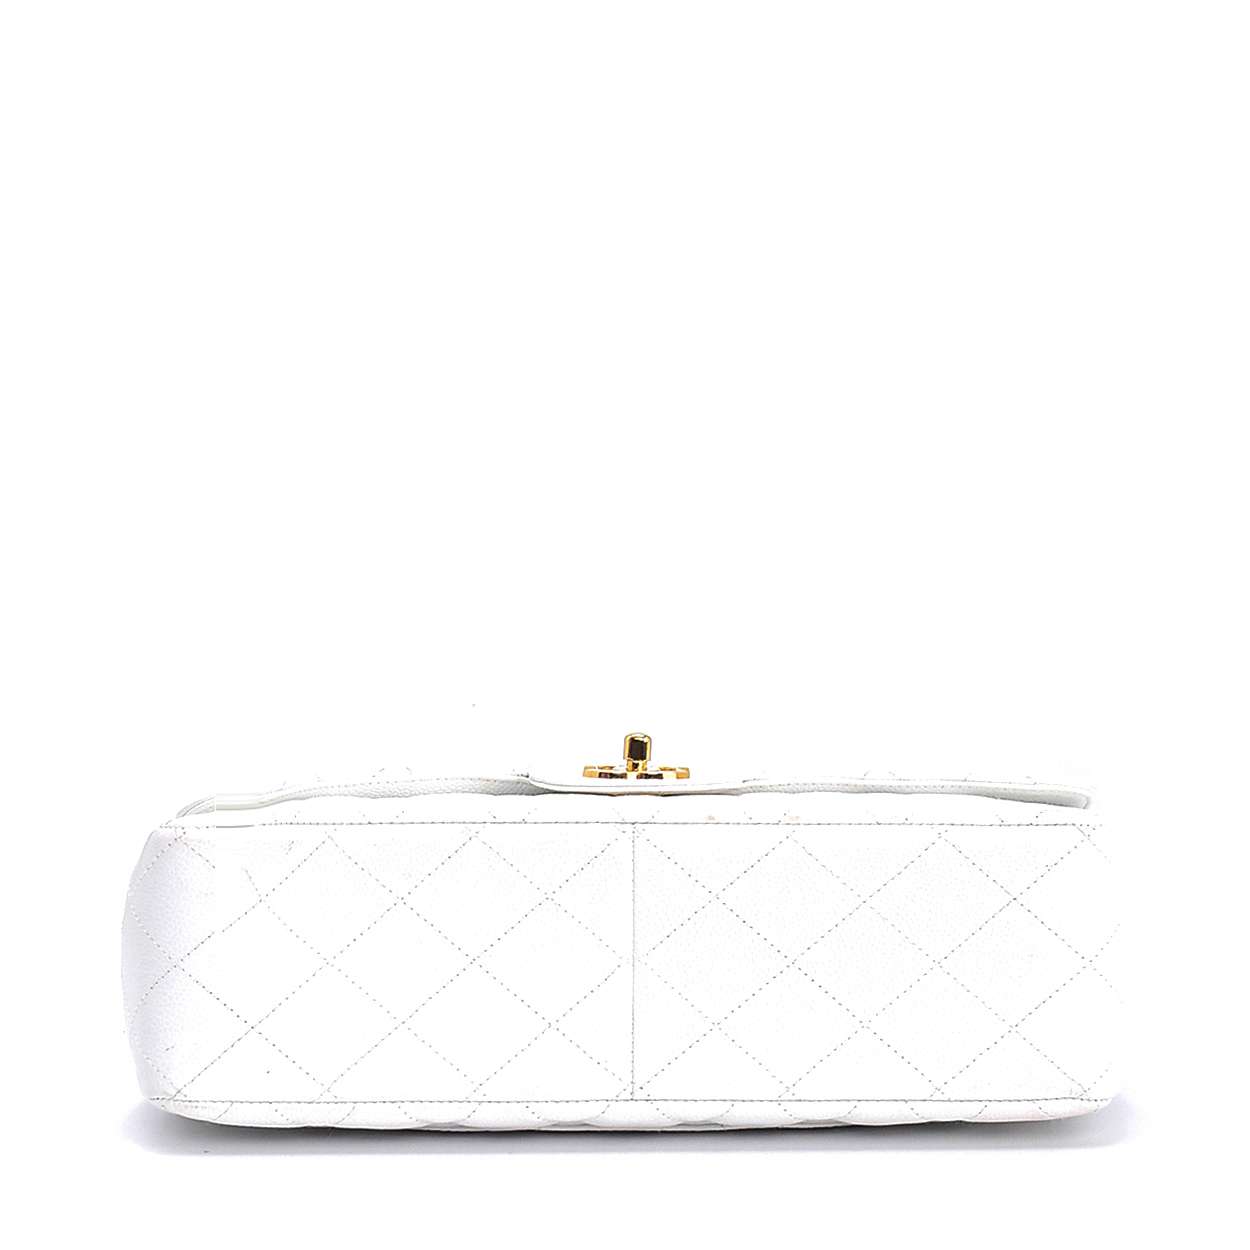 Chanel - White Quilted Caviar Leather Jumbo Single Flap Bag